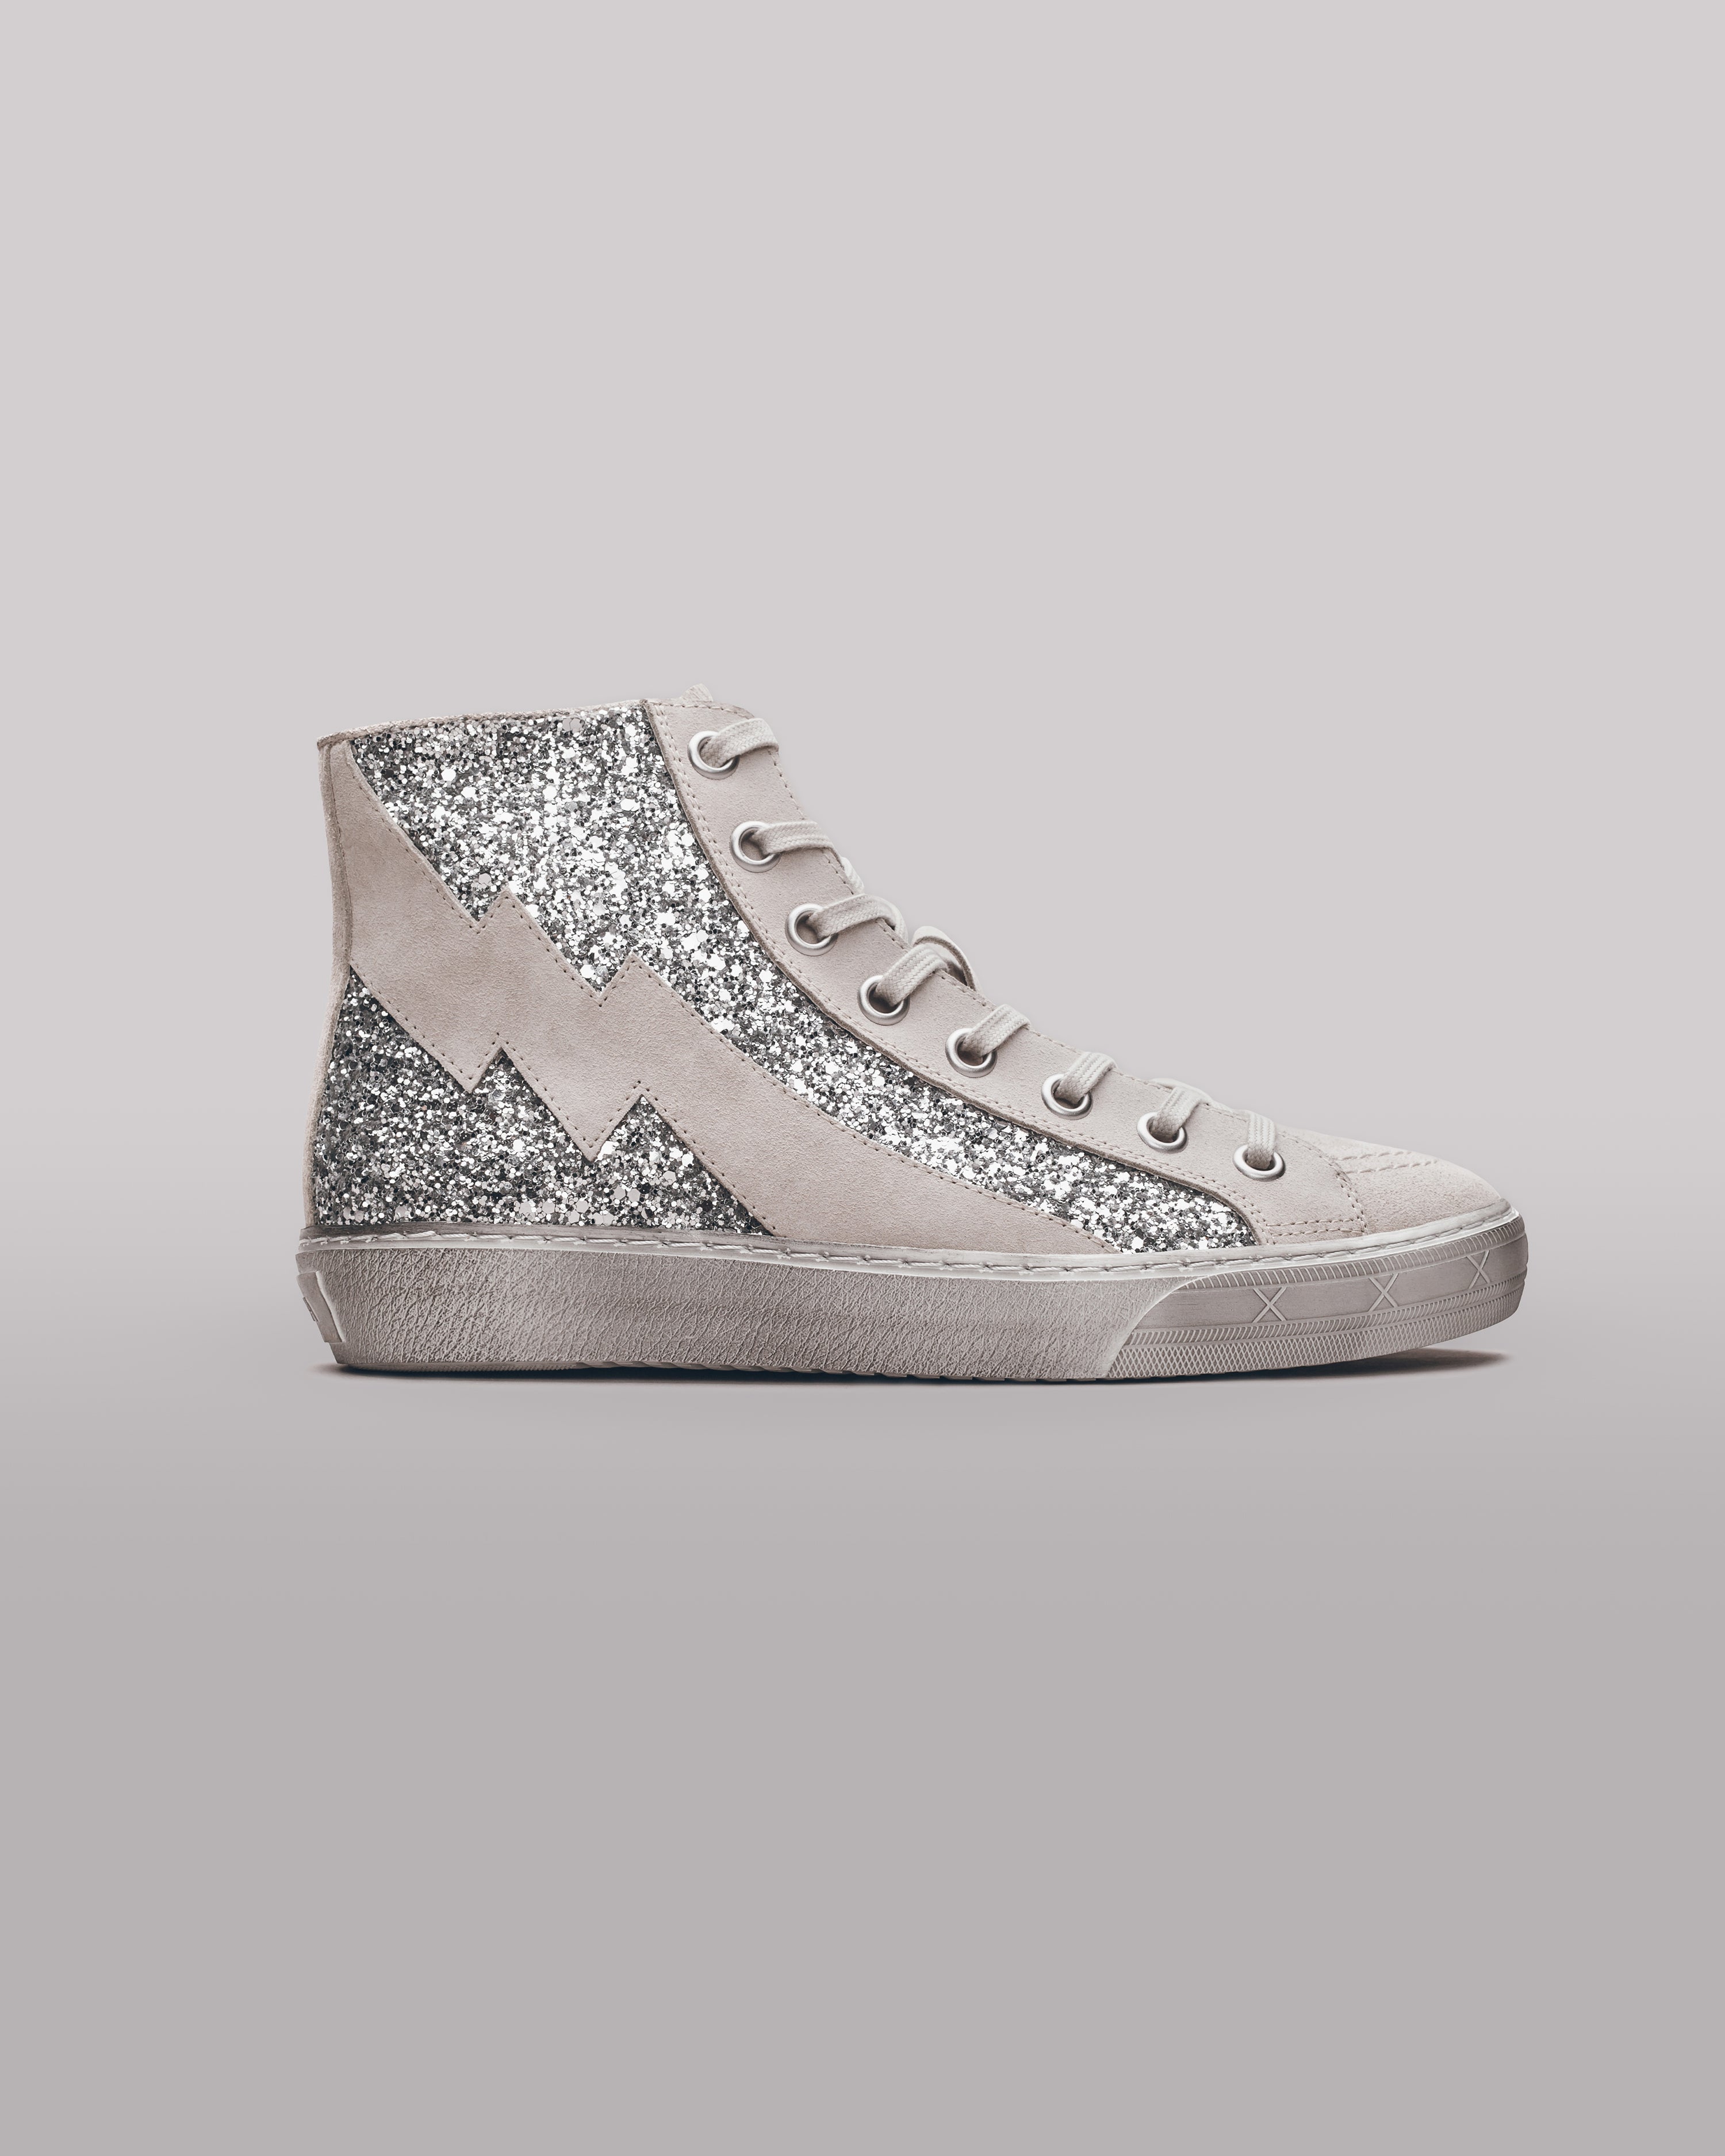 The Glitter Sneakers